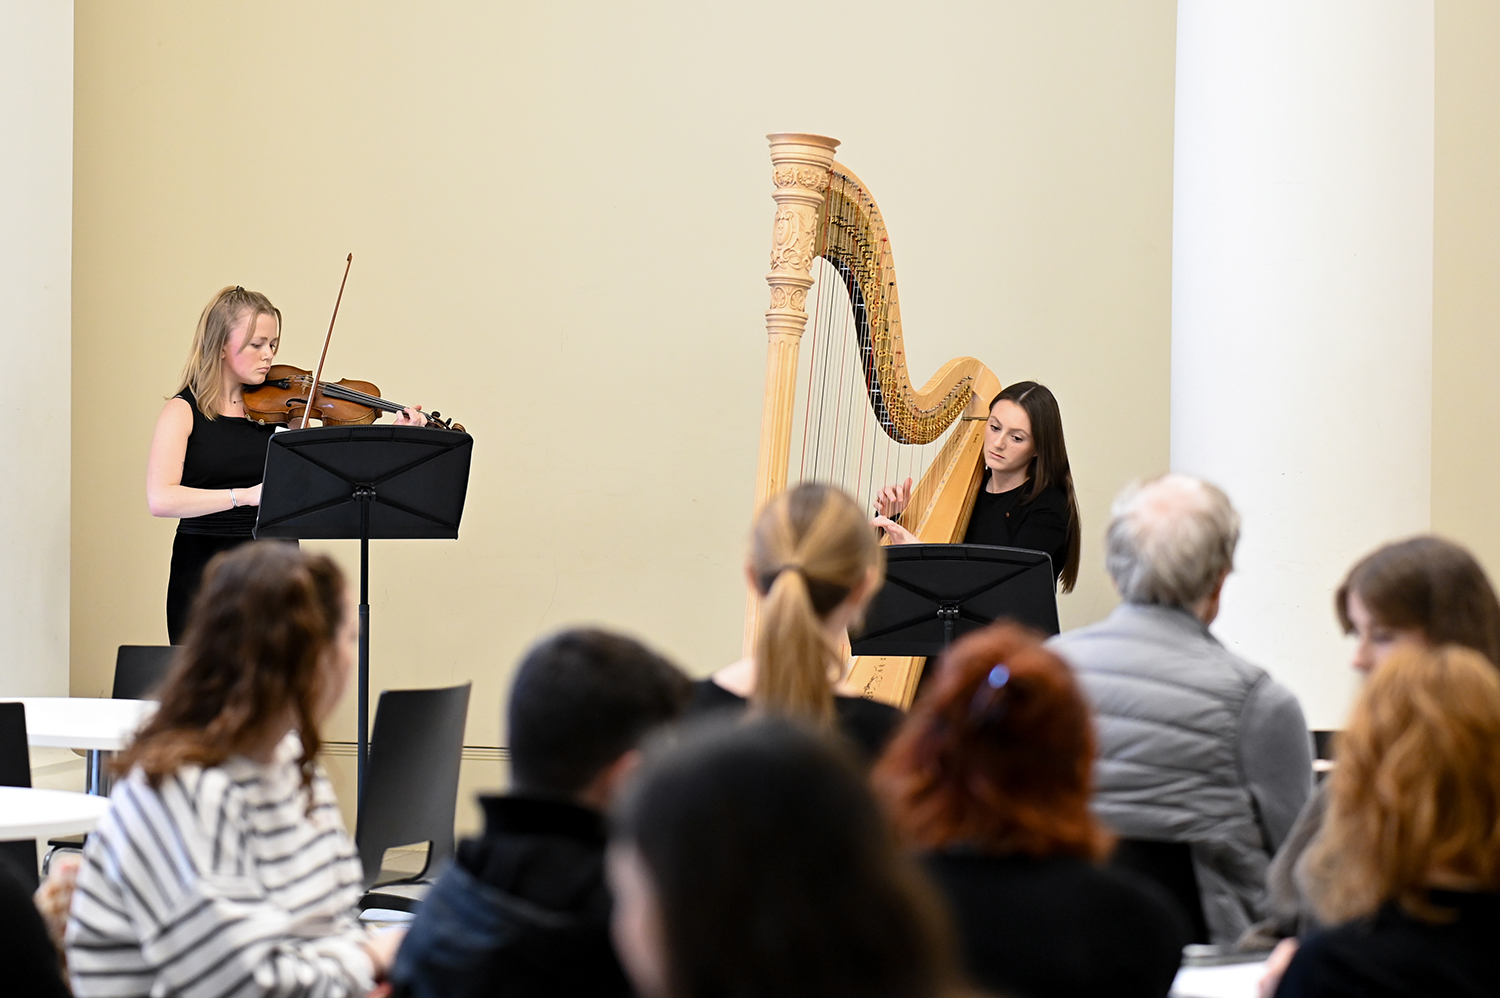 A flautist and a harpist performing during a chamber concert